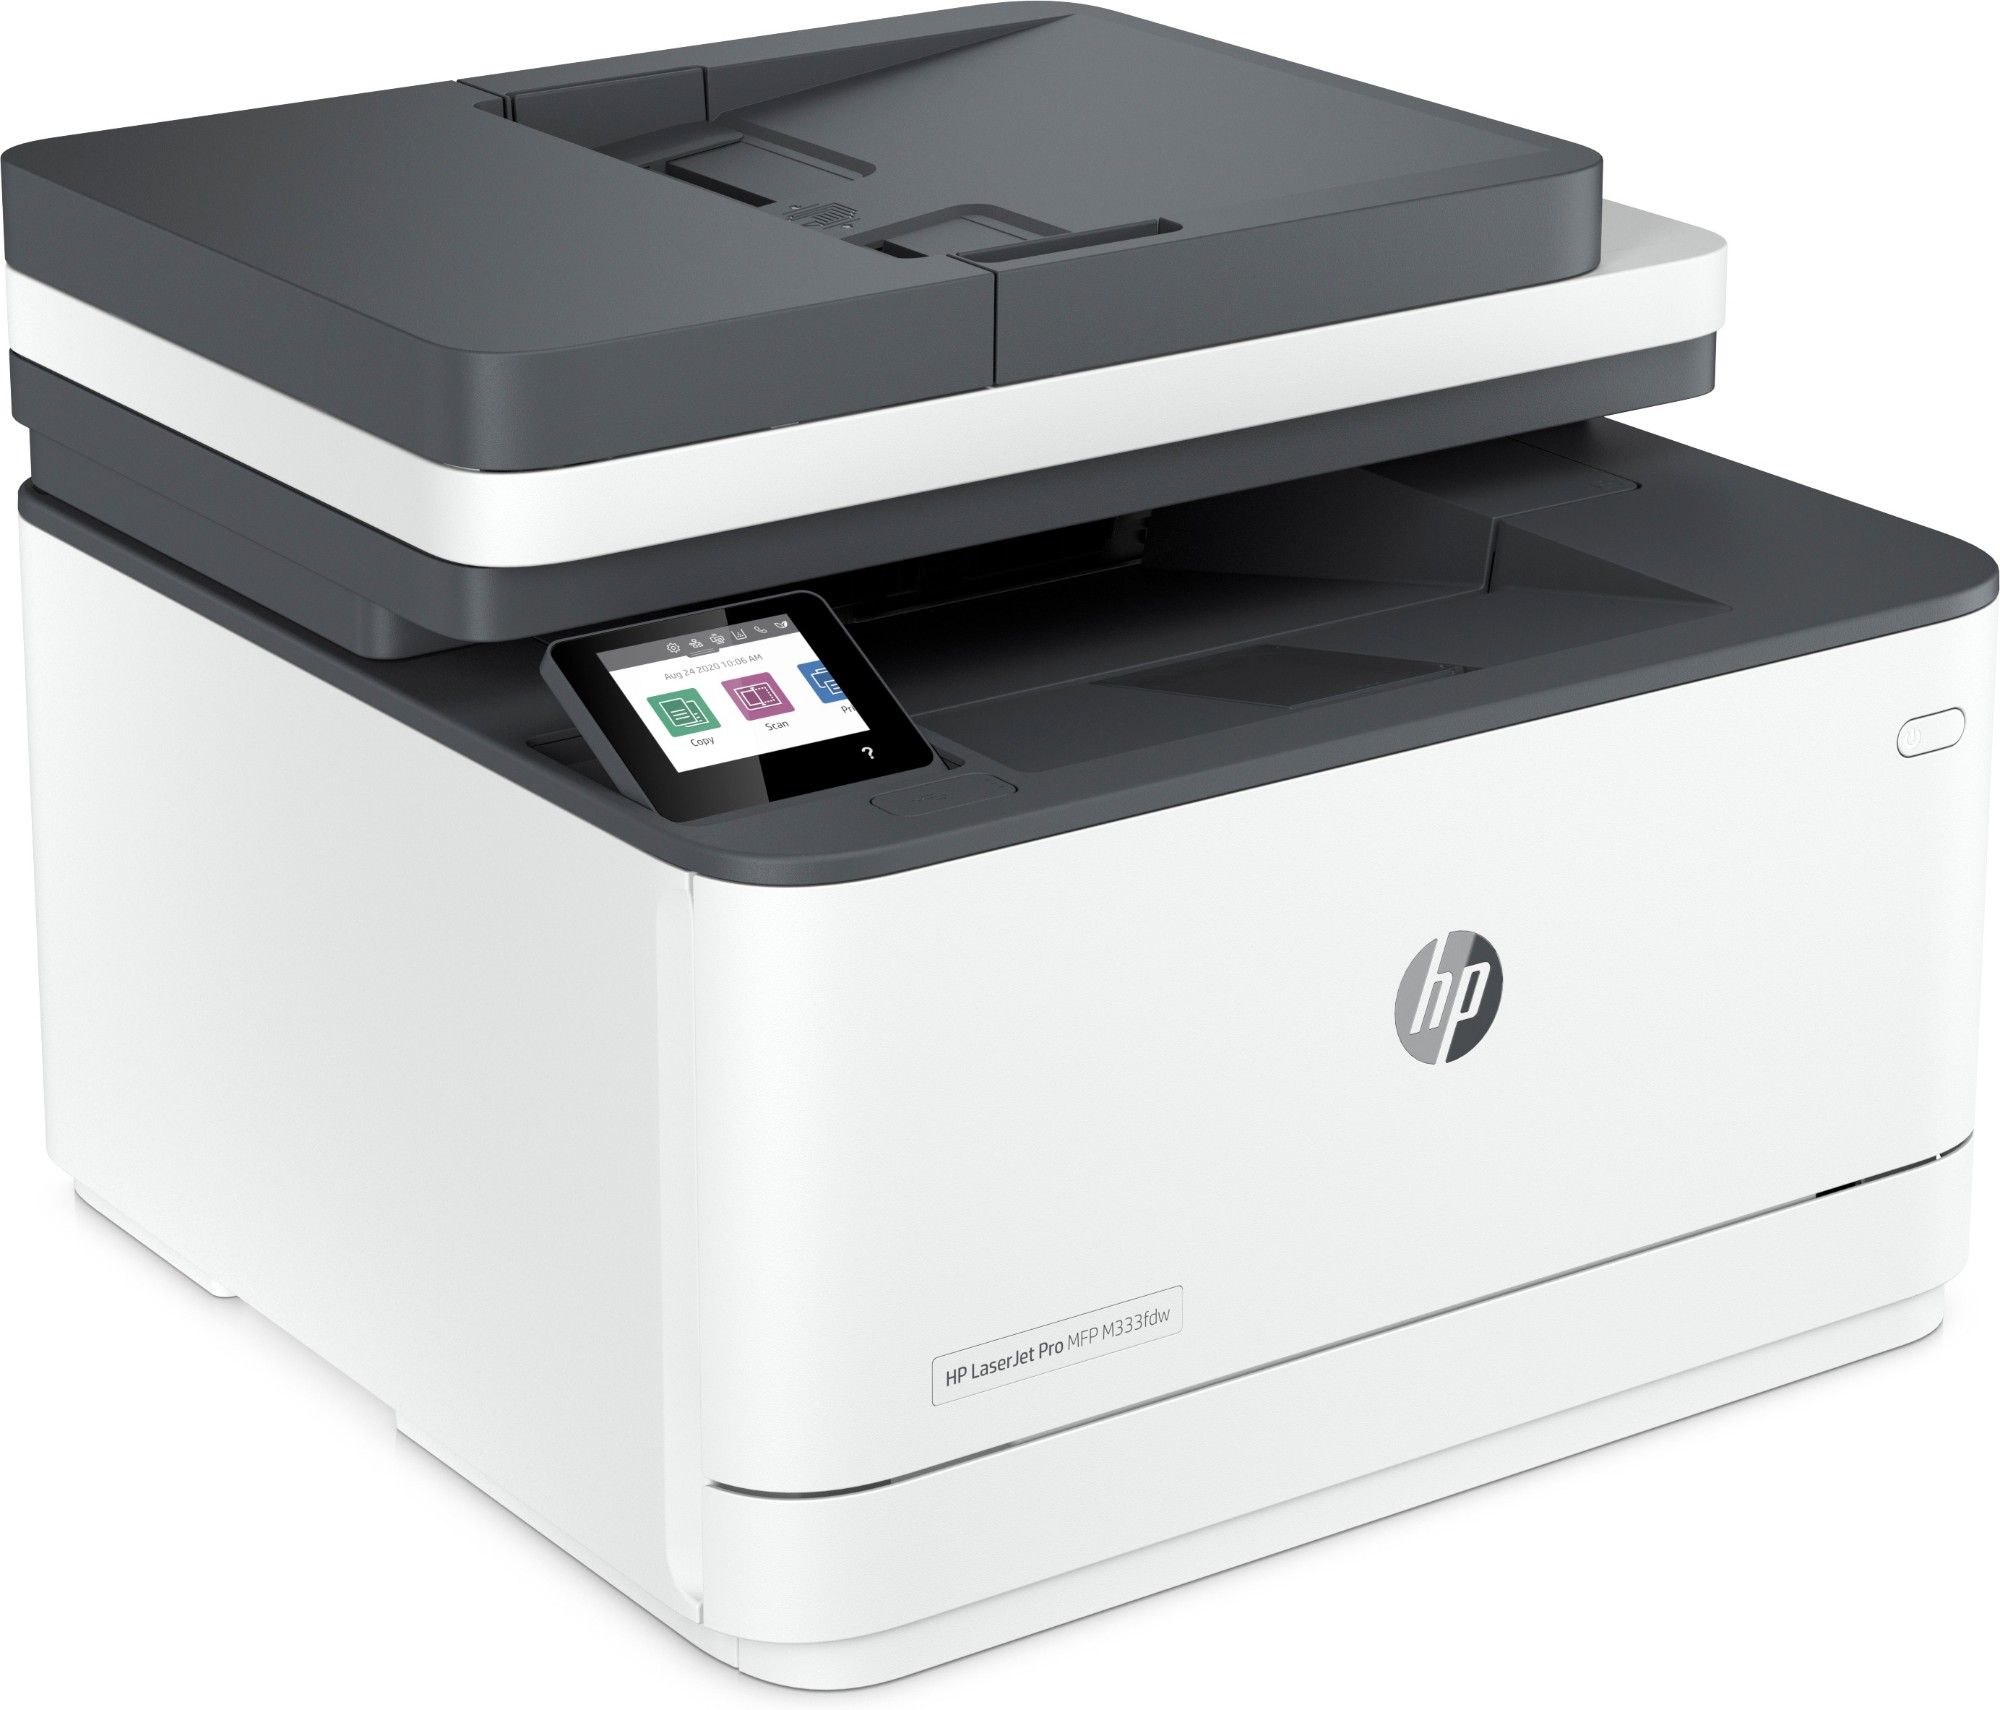 HP LaserJet Pro MFP 3102fdw Printer, Black and white, Printer for Small medium business, Print, copy, scan, fax, Wireless; Print from phone or tablet; Two-sided printing; Two-sided scanning; Fax